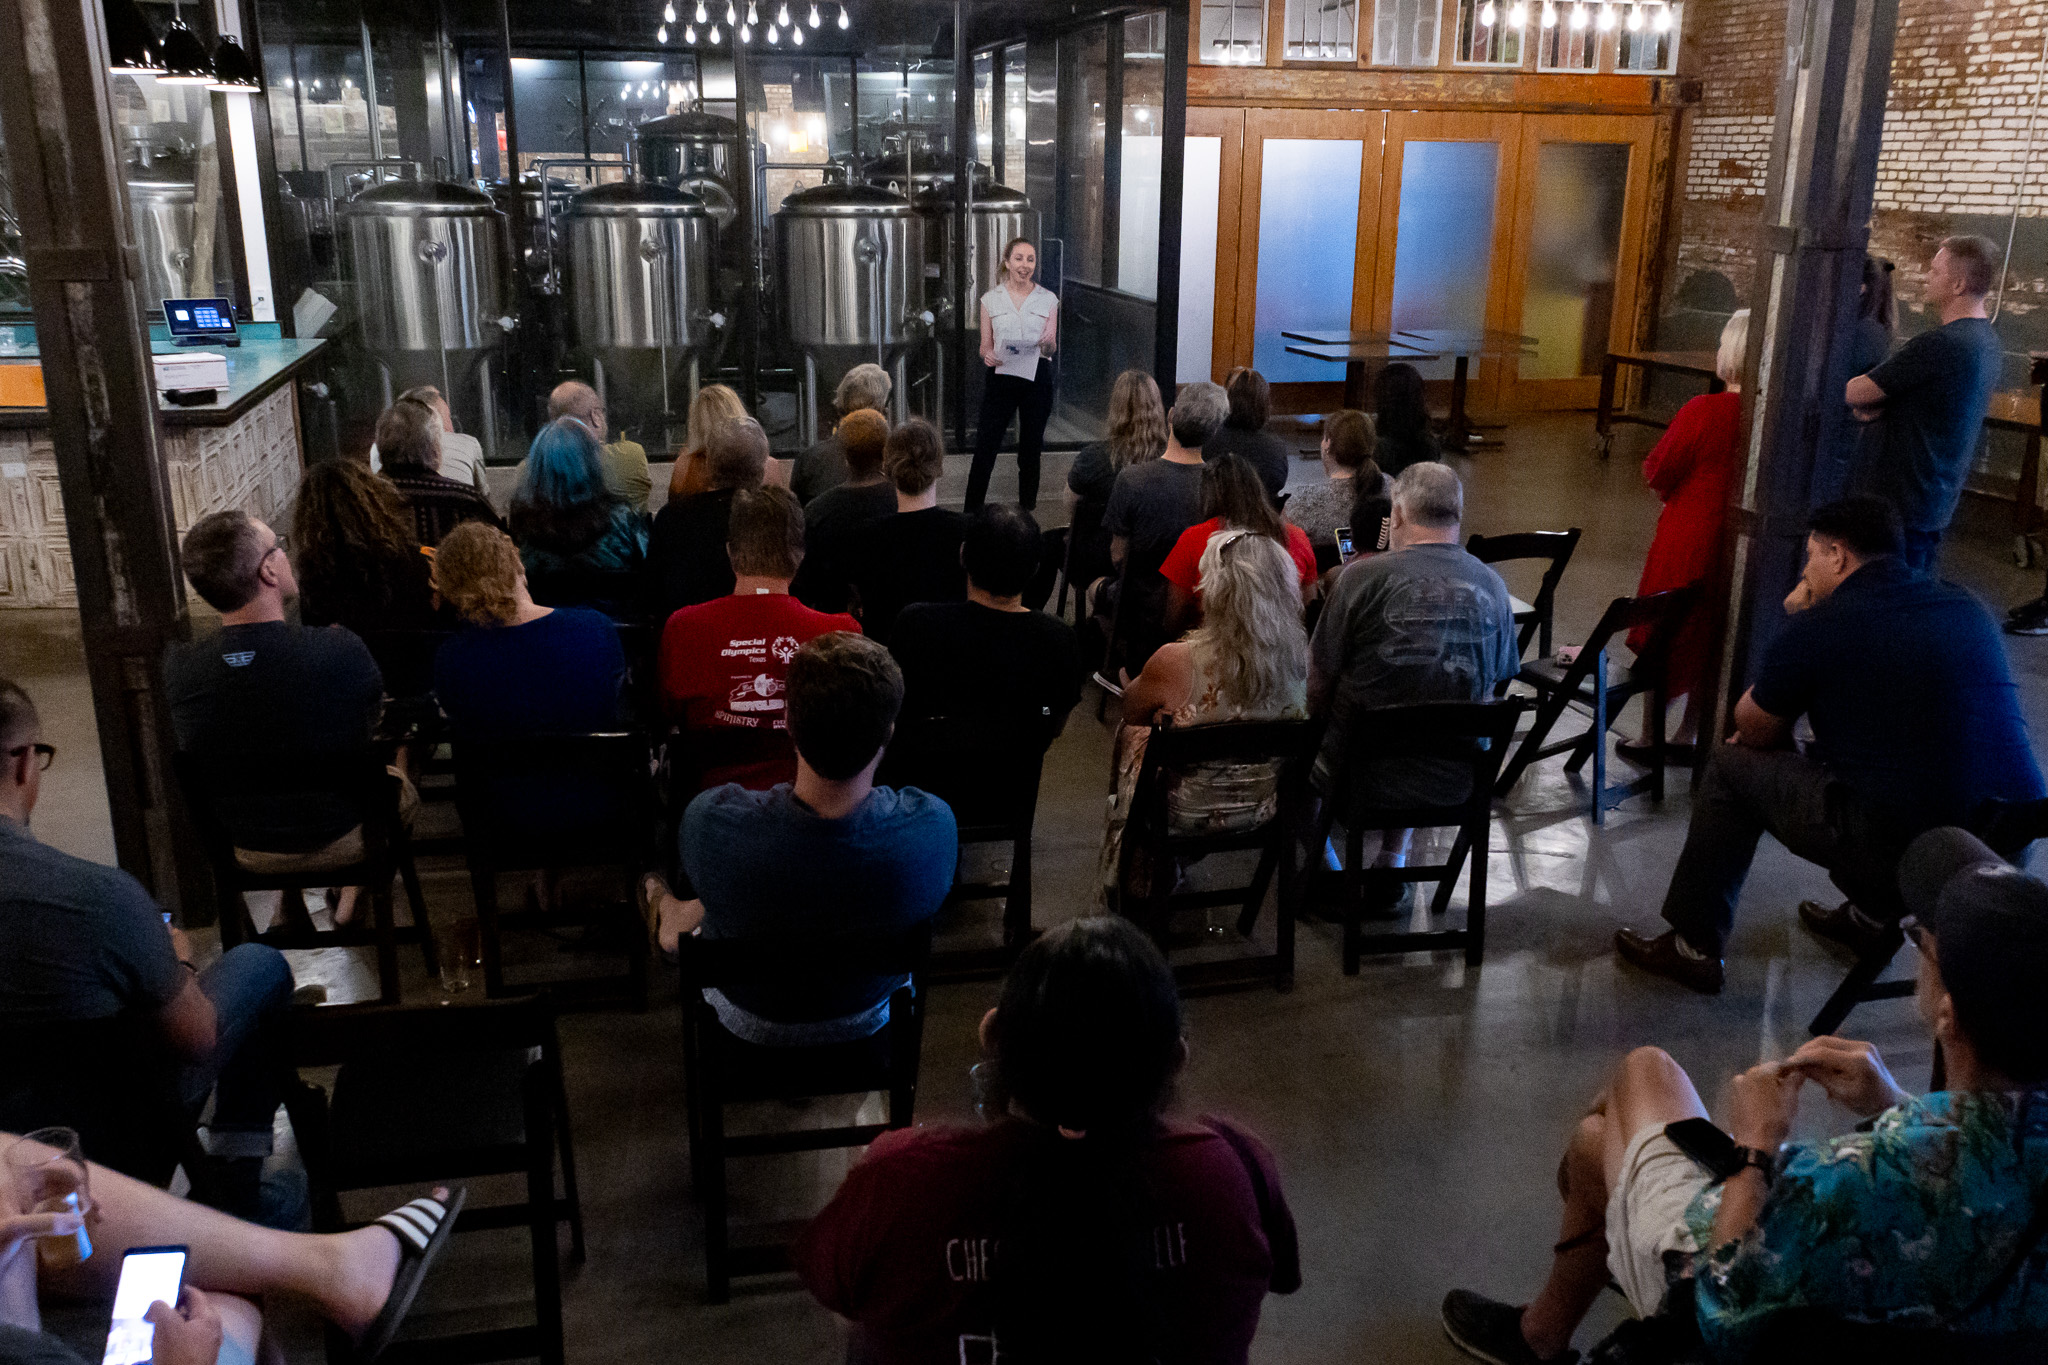 Crowd shot of people attending Bikes and Brews at Four Corners Brewery. In this photo, Kathryn Rush is speaking at the front of the room.